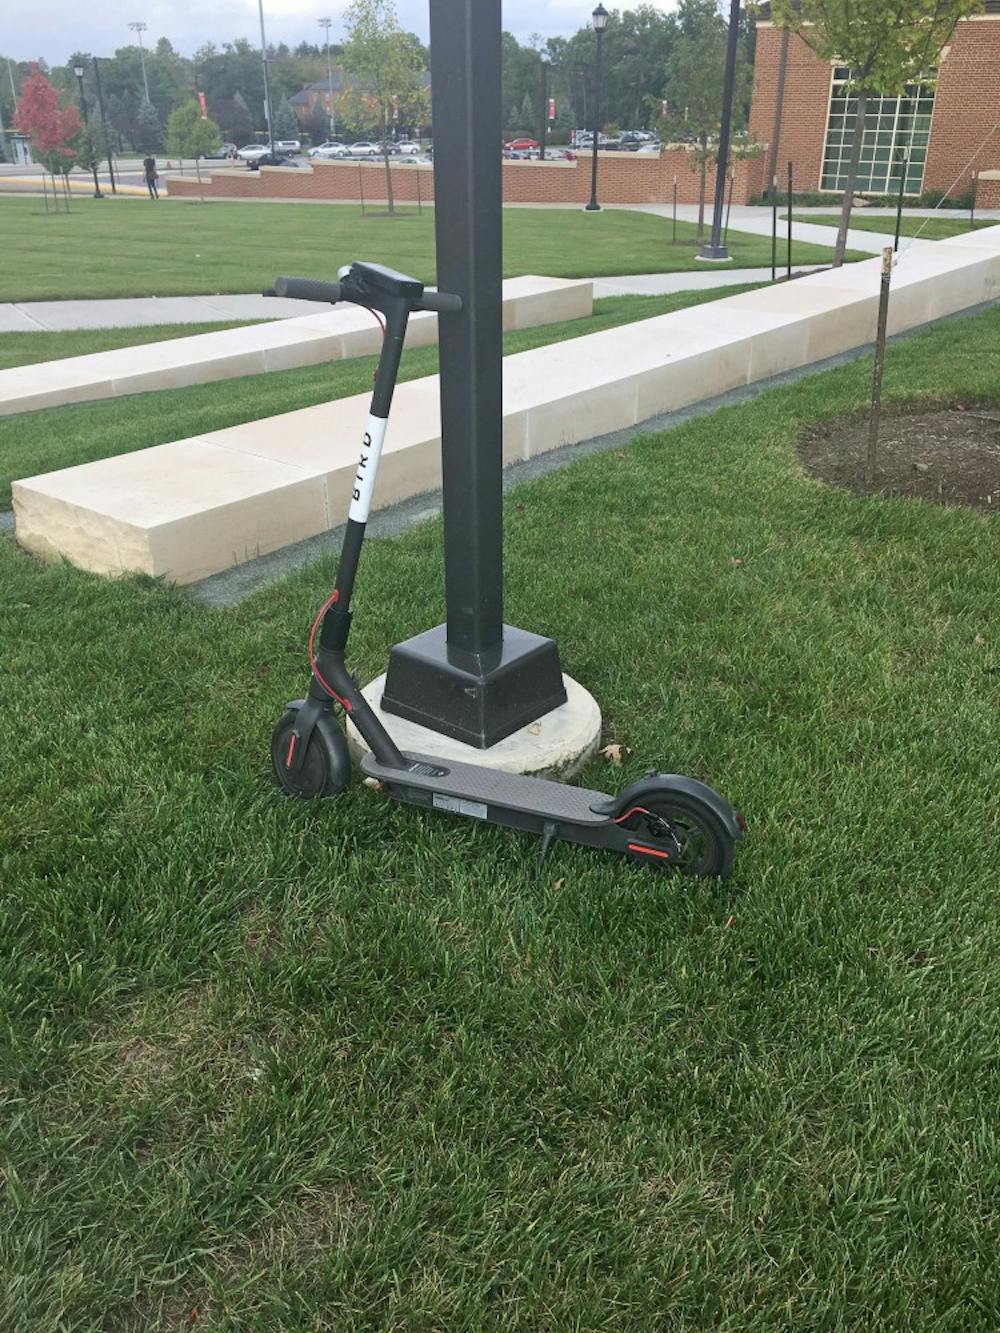 This is an example of an improperly parked scooter.